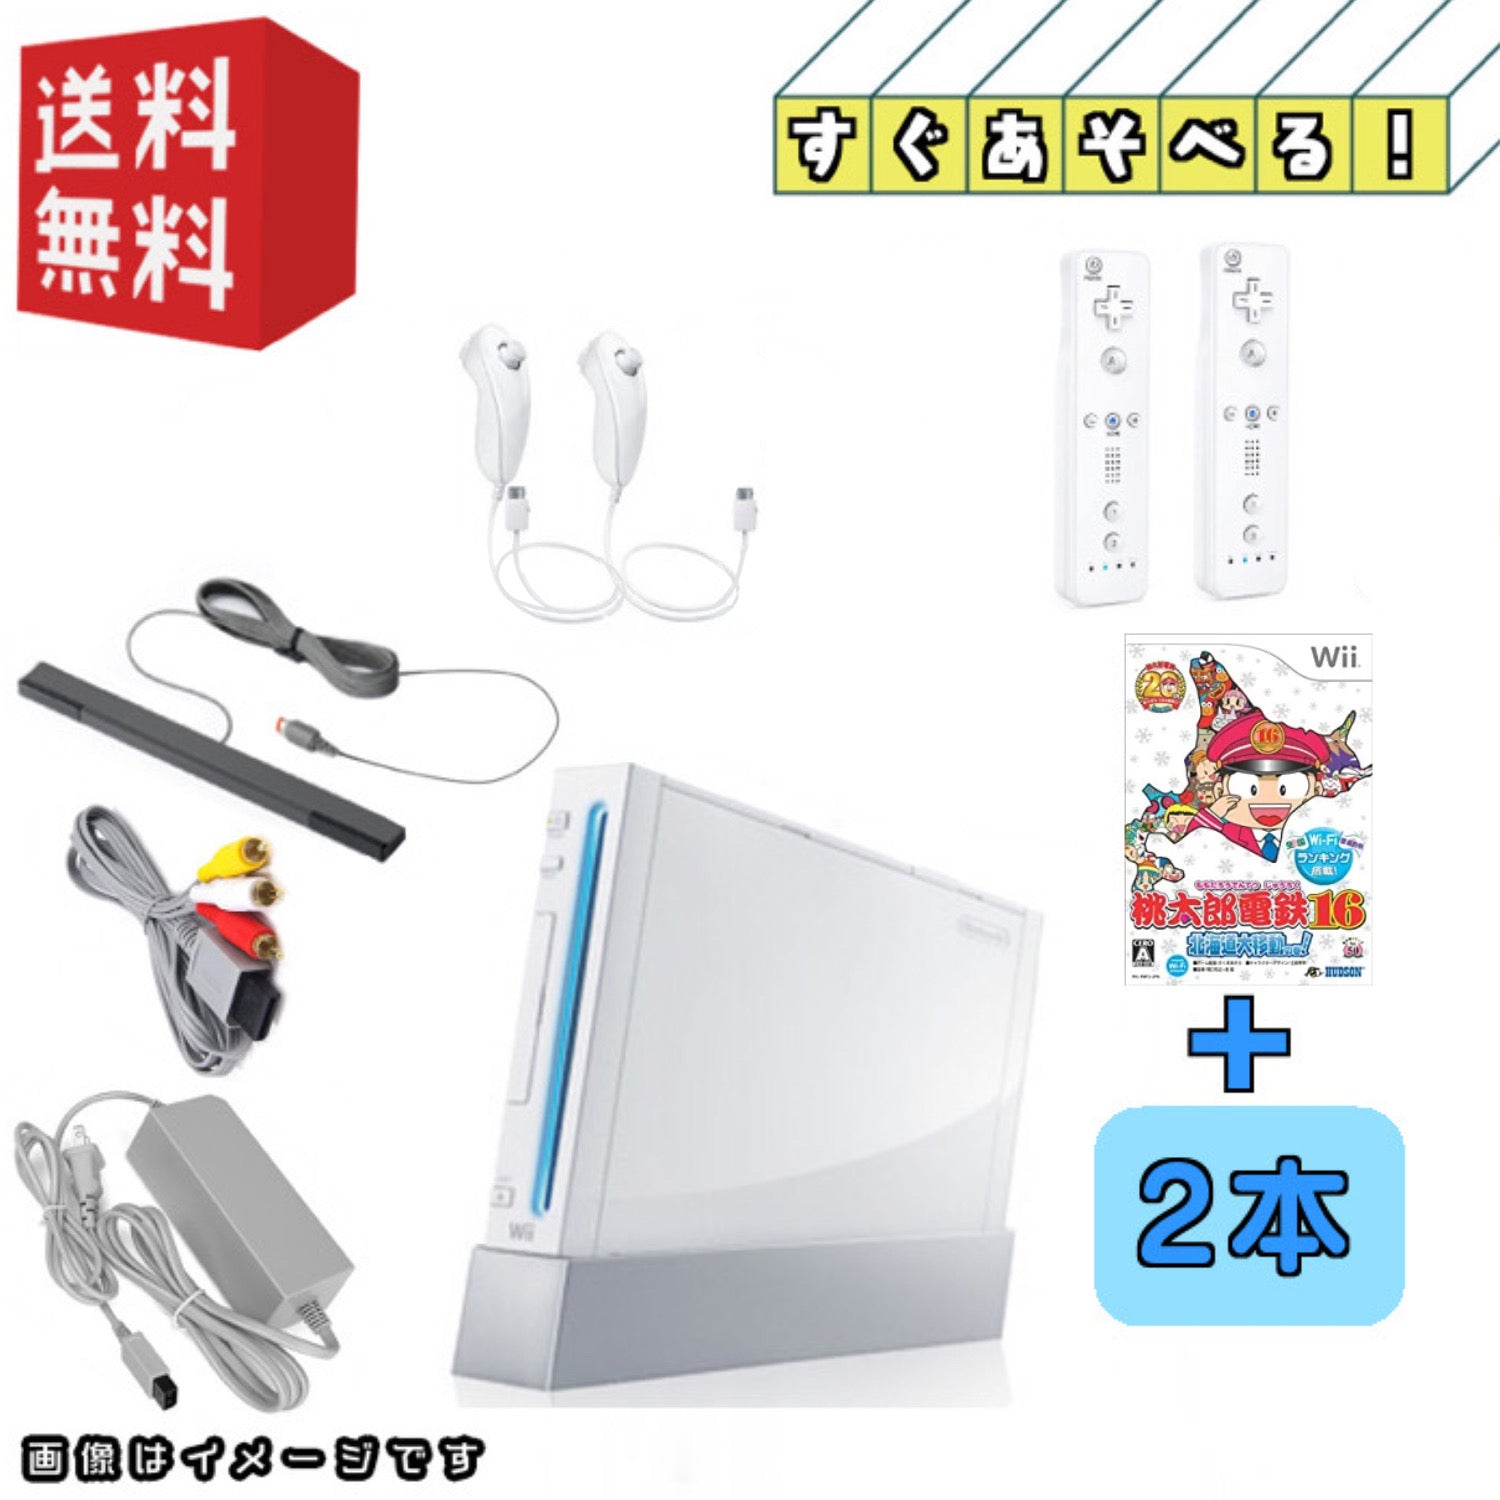 ⭐︎ Wii本体、各コントローラー、ソフトのセット⭐︎ - 家庭用ゲーム本体